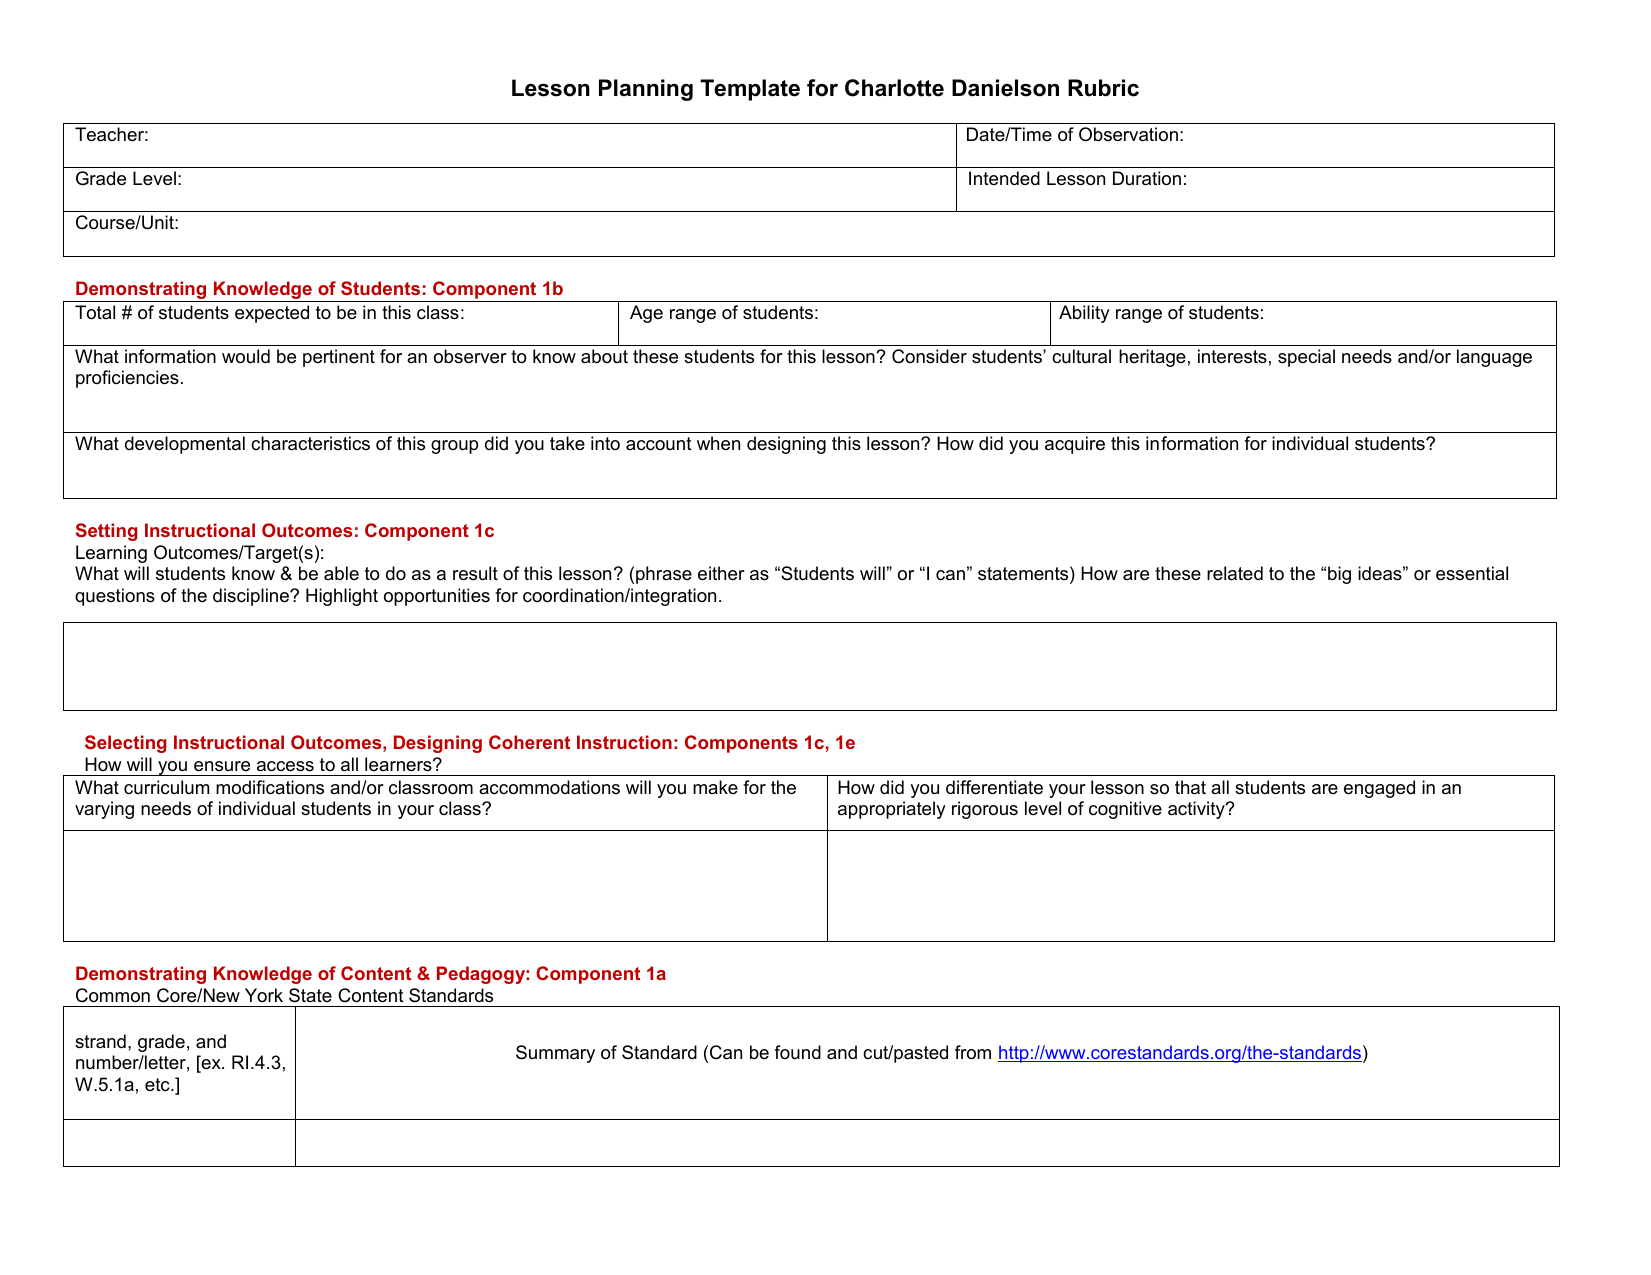 Preobservation Lesson Planning Template Aligned with FFT Rubric